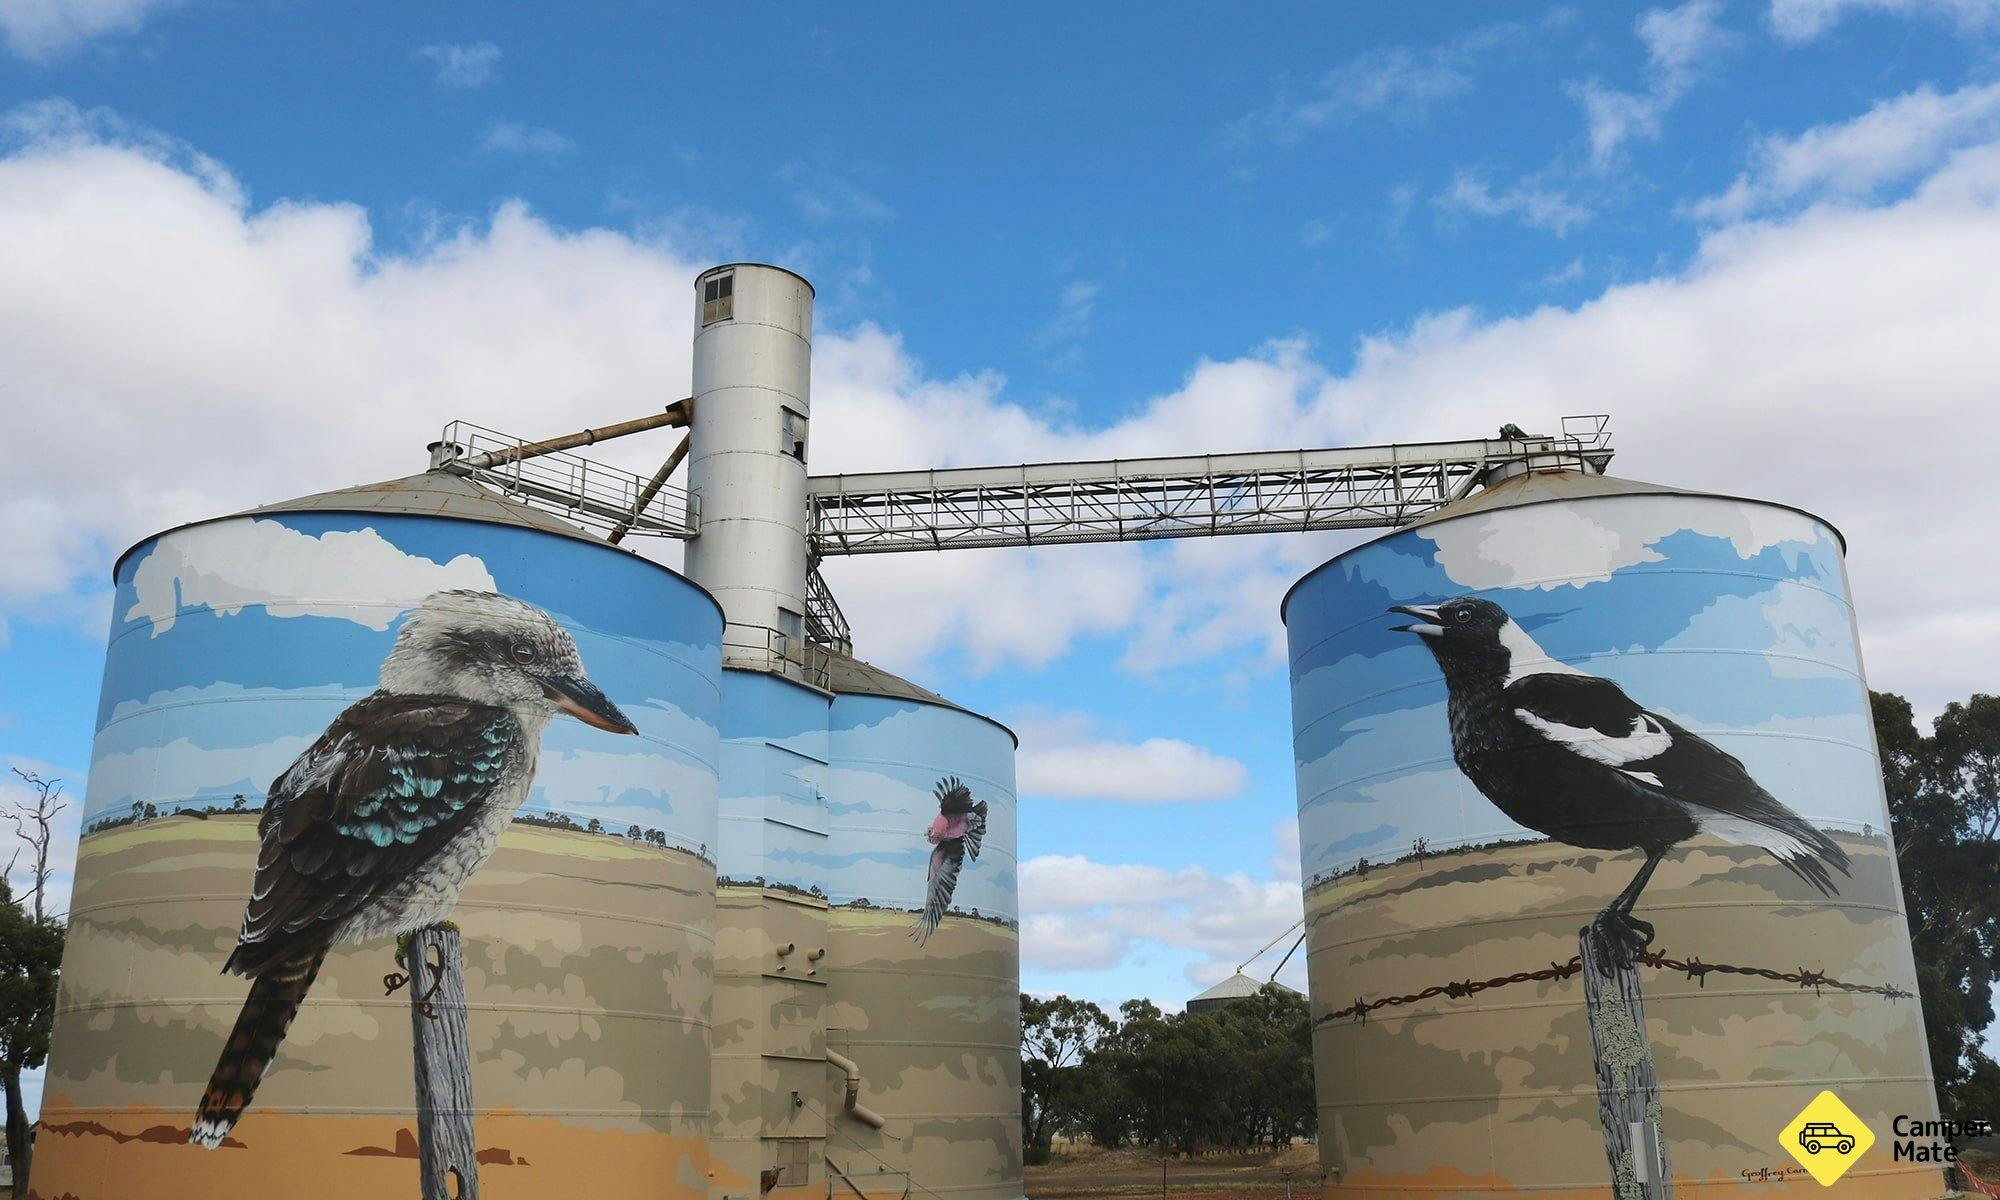 Where to see Silo Art between Adelaide and Melbourne